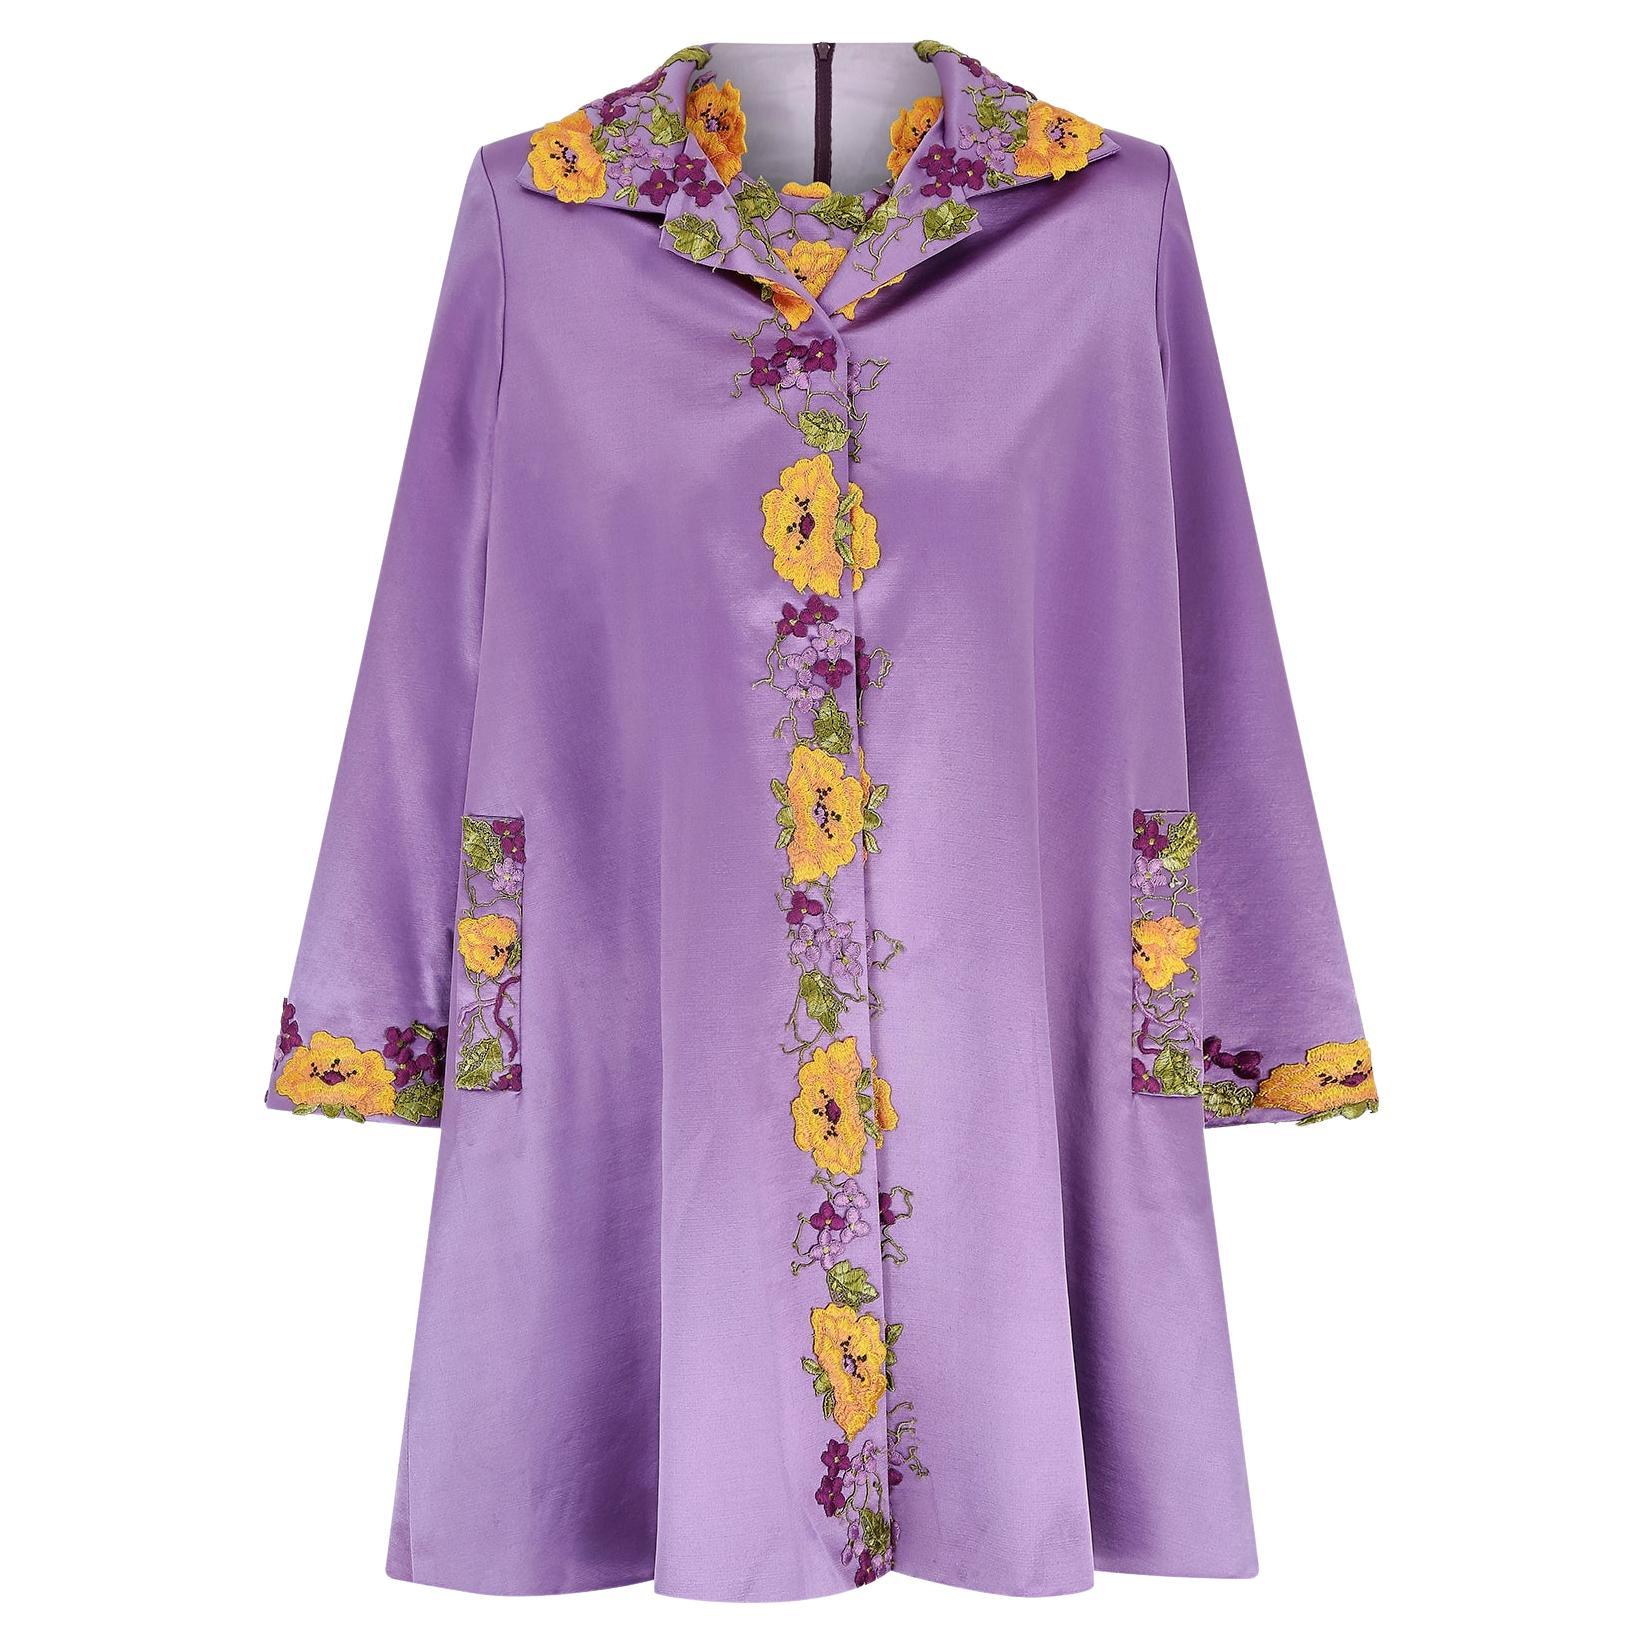 Women's 1990s Bespoke Purple Floral Embroidered Dress Jacket Suit For Sale